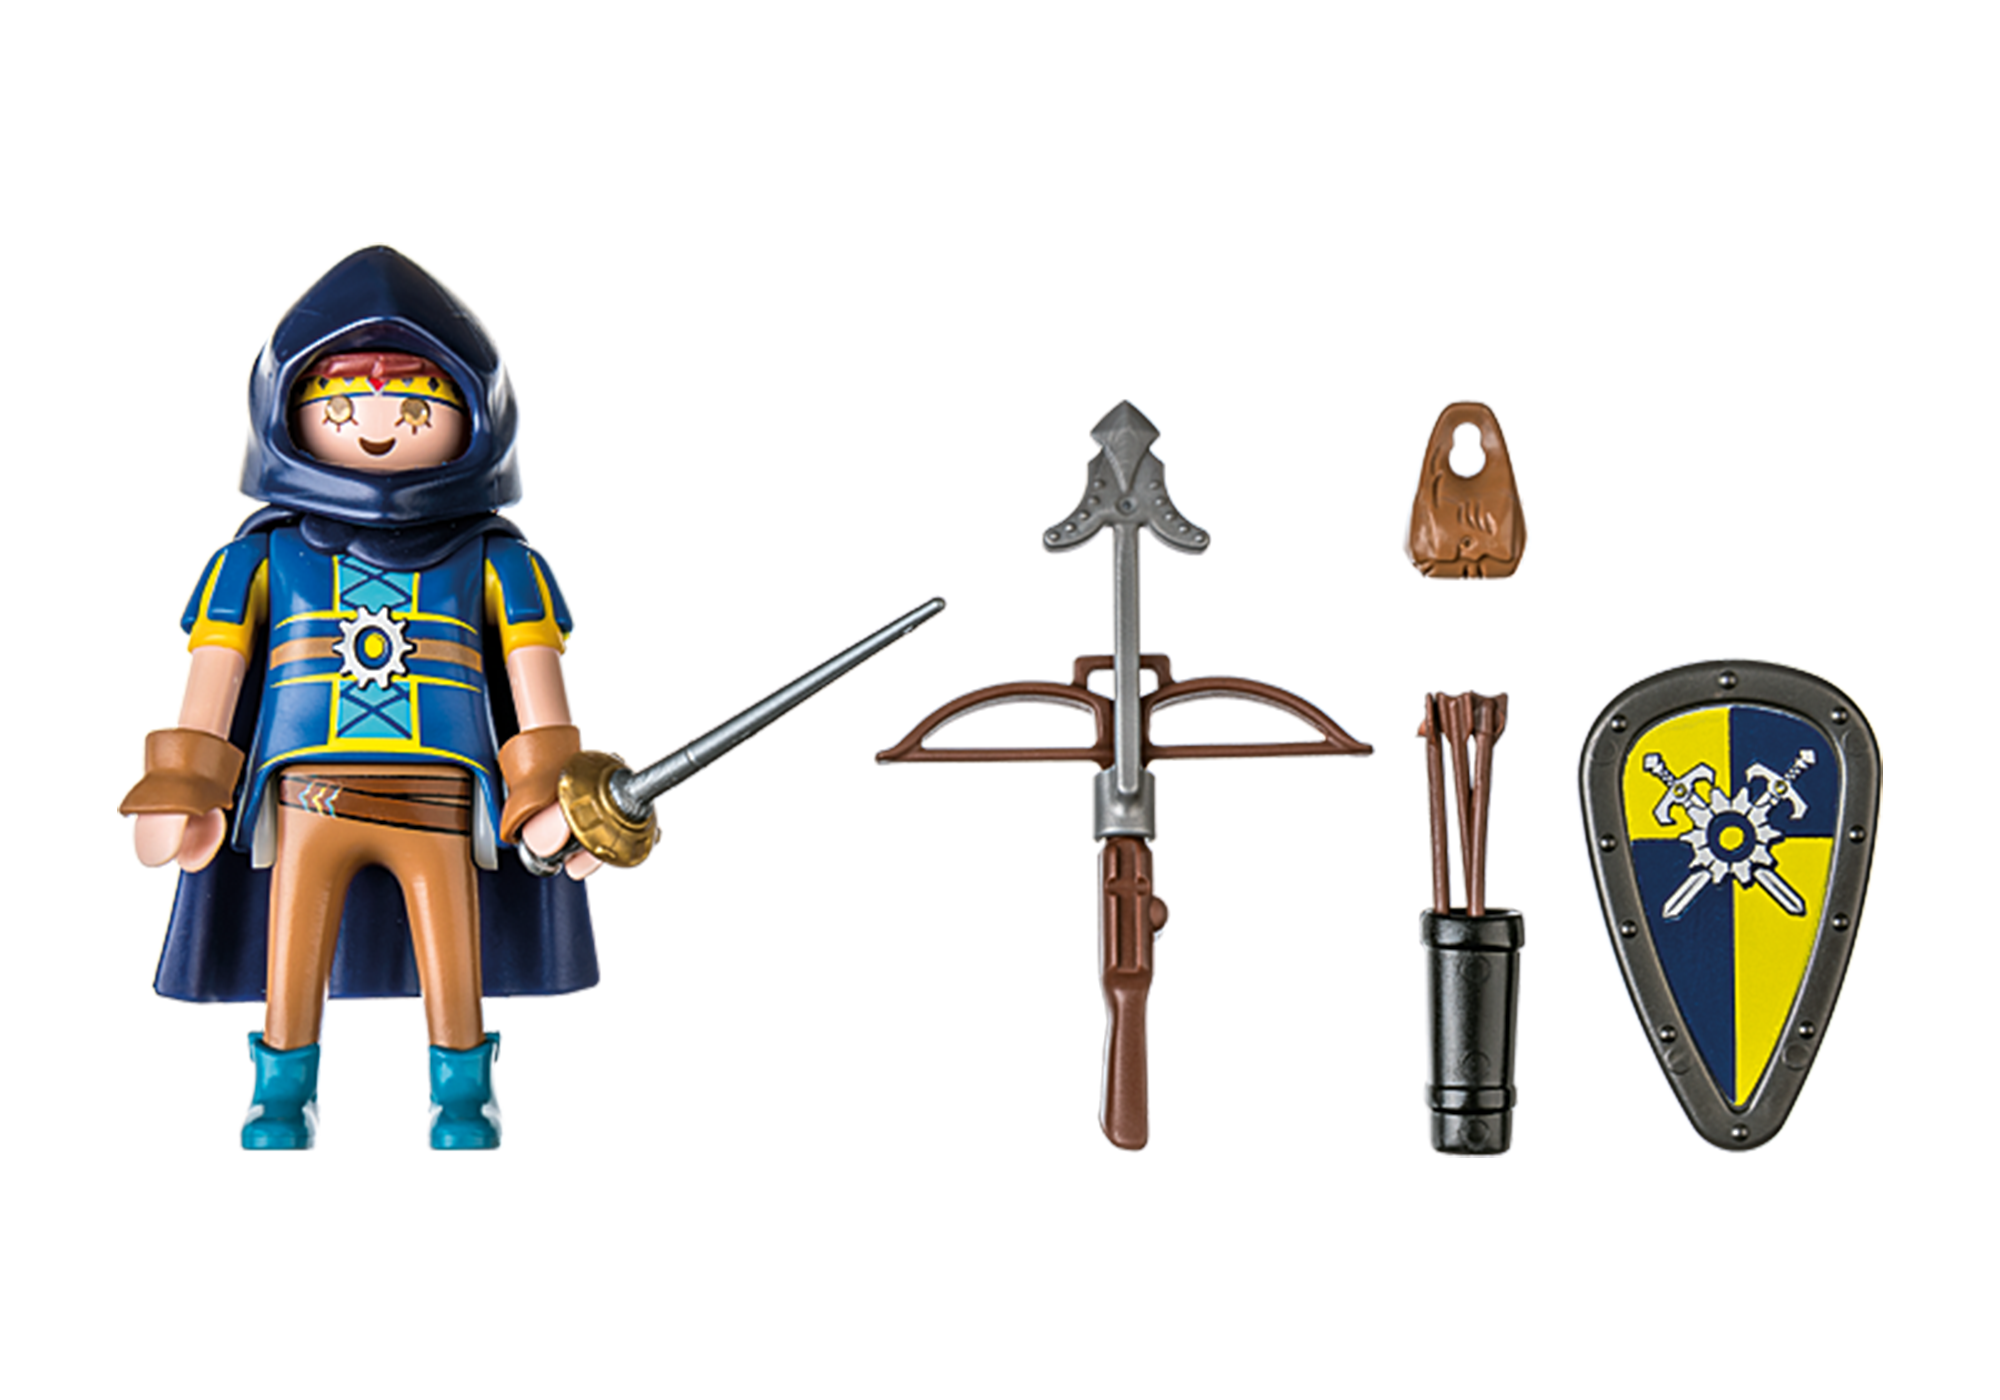 Welcome to the world of Novelmore by PLAYMOBIL